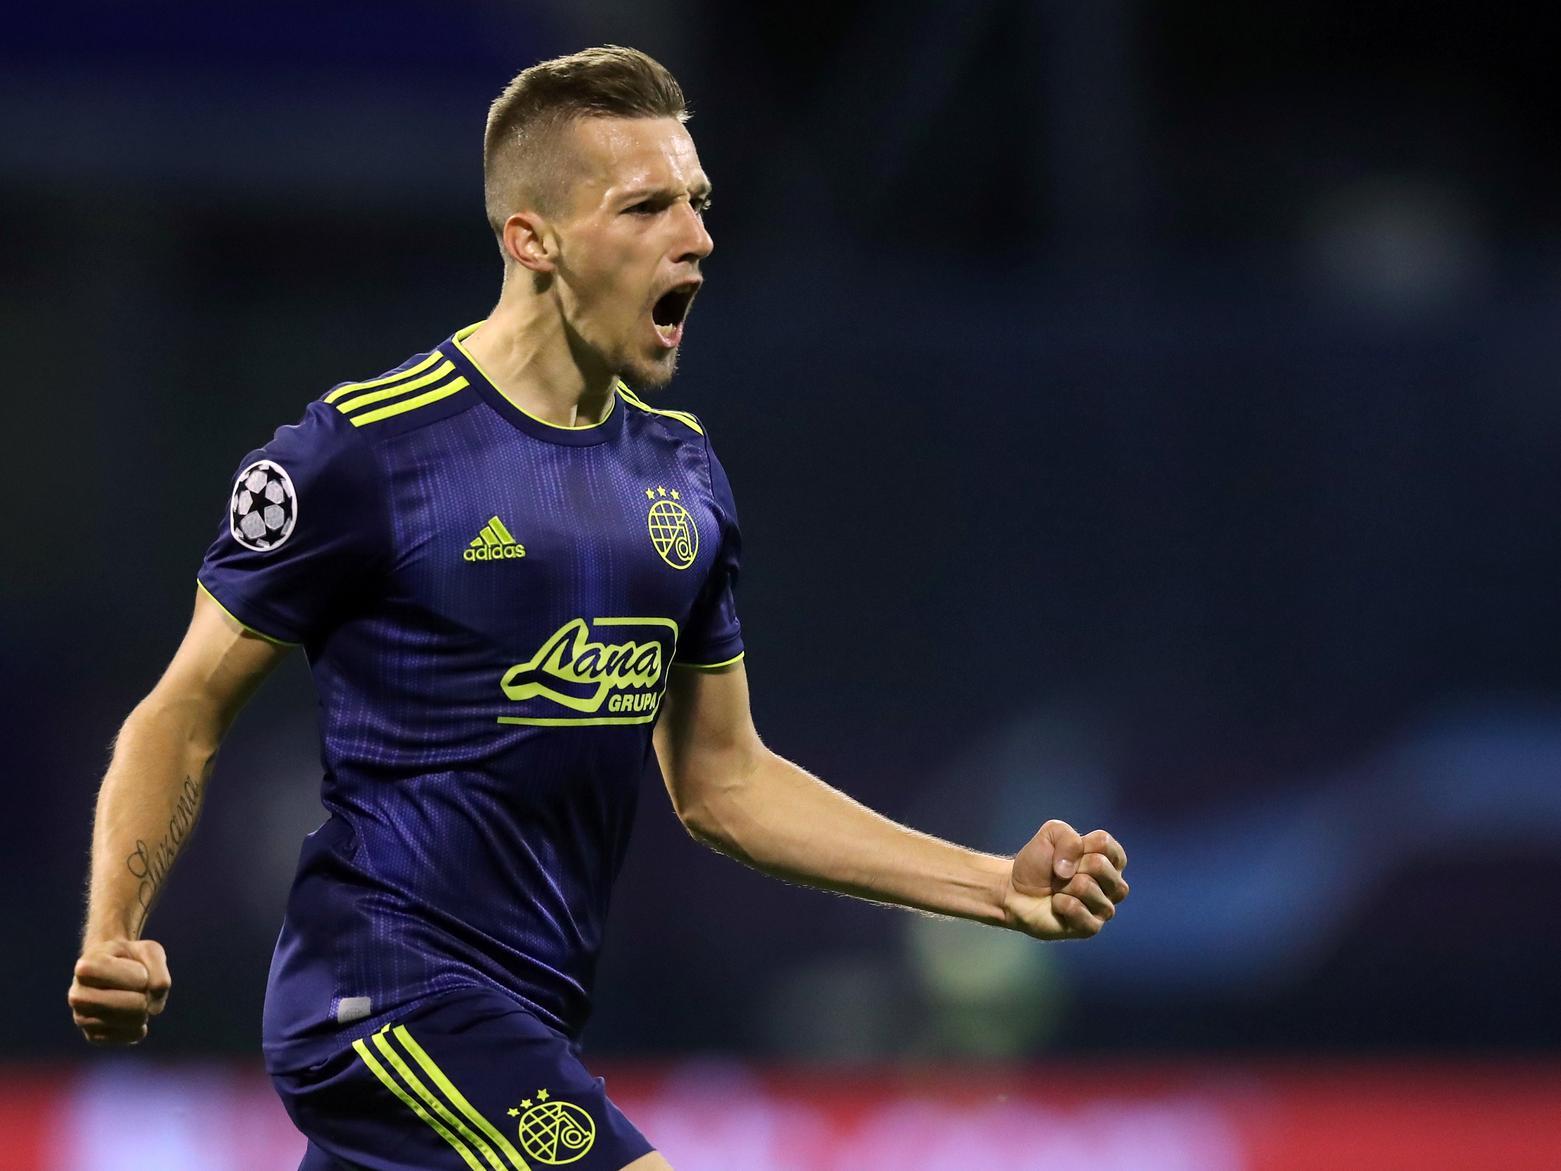 West Bromwich Albion are understood to be steppingup their efforts to sign Croatian star Mislav Orsic, who has scored 19 goals this season, including a Champions League hat-trick against Atalanta. (Birmingham Mail)